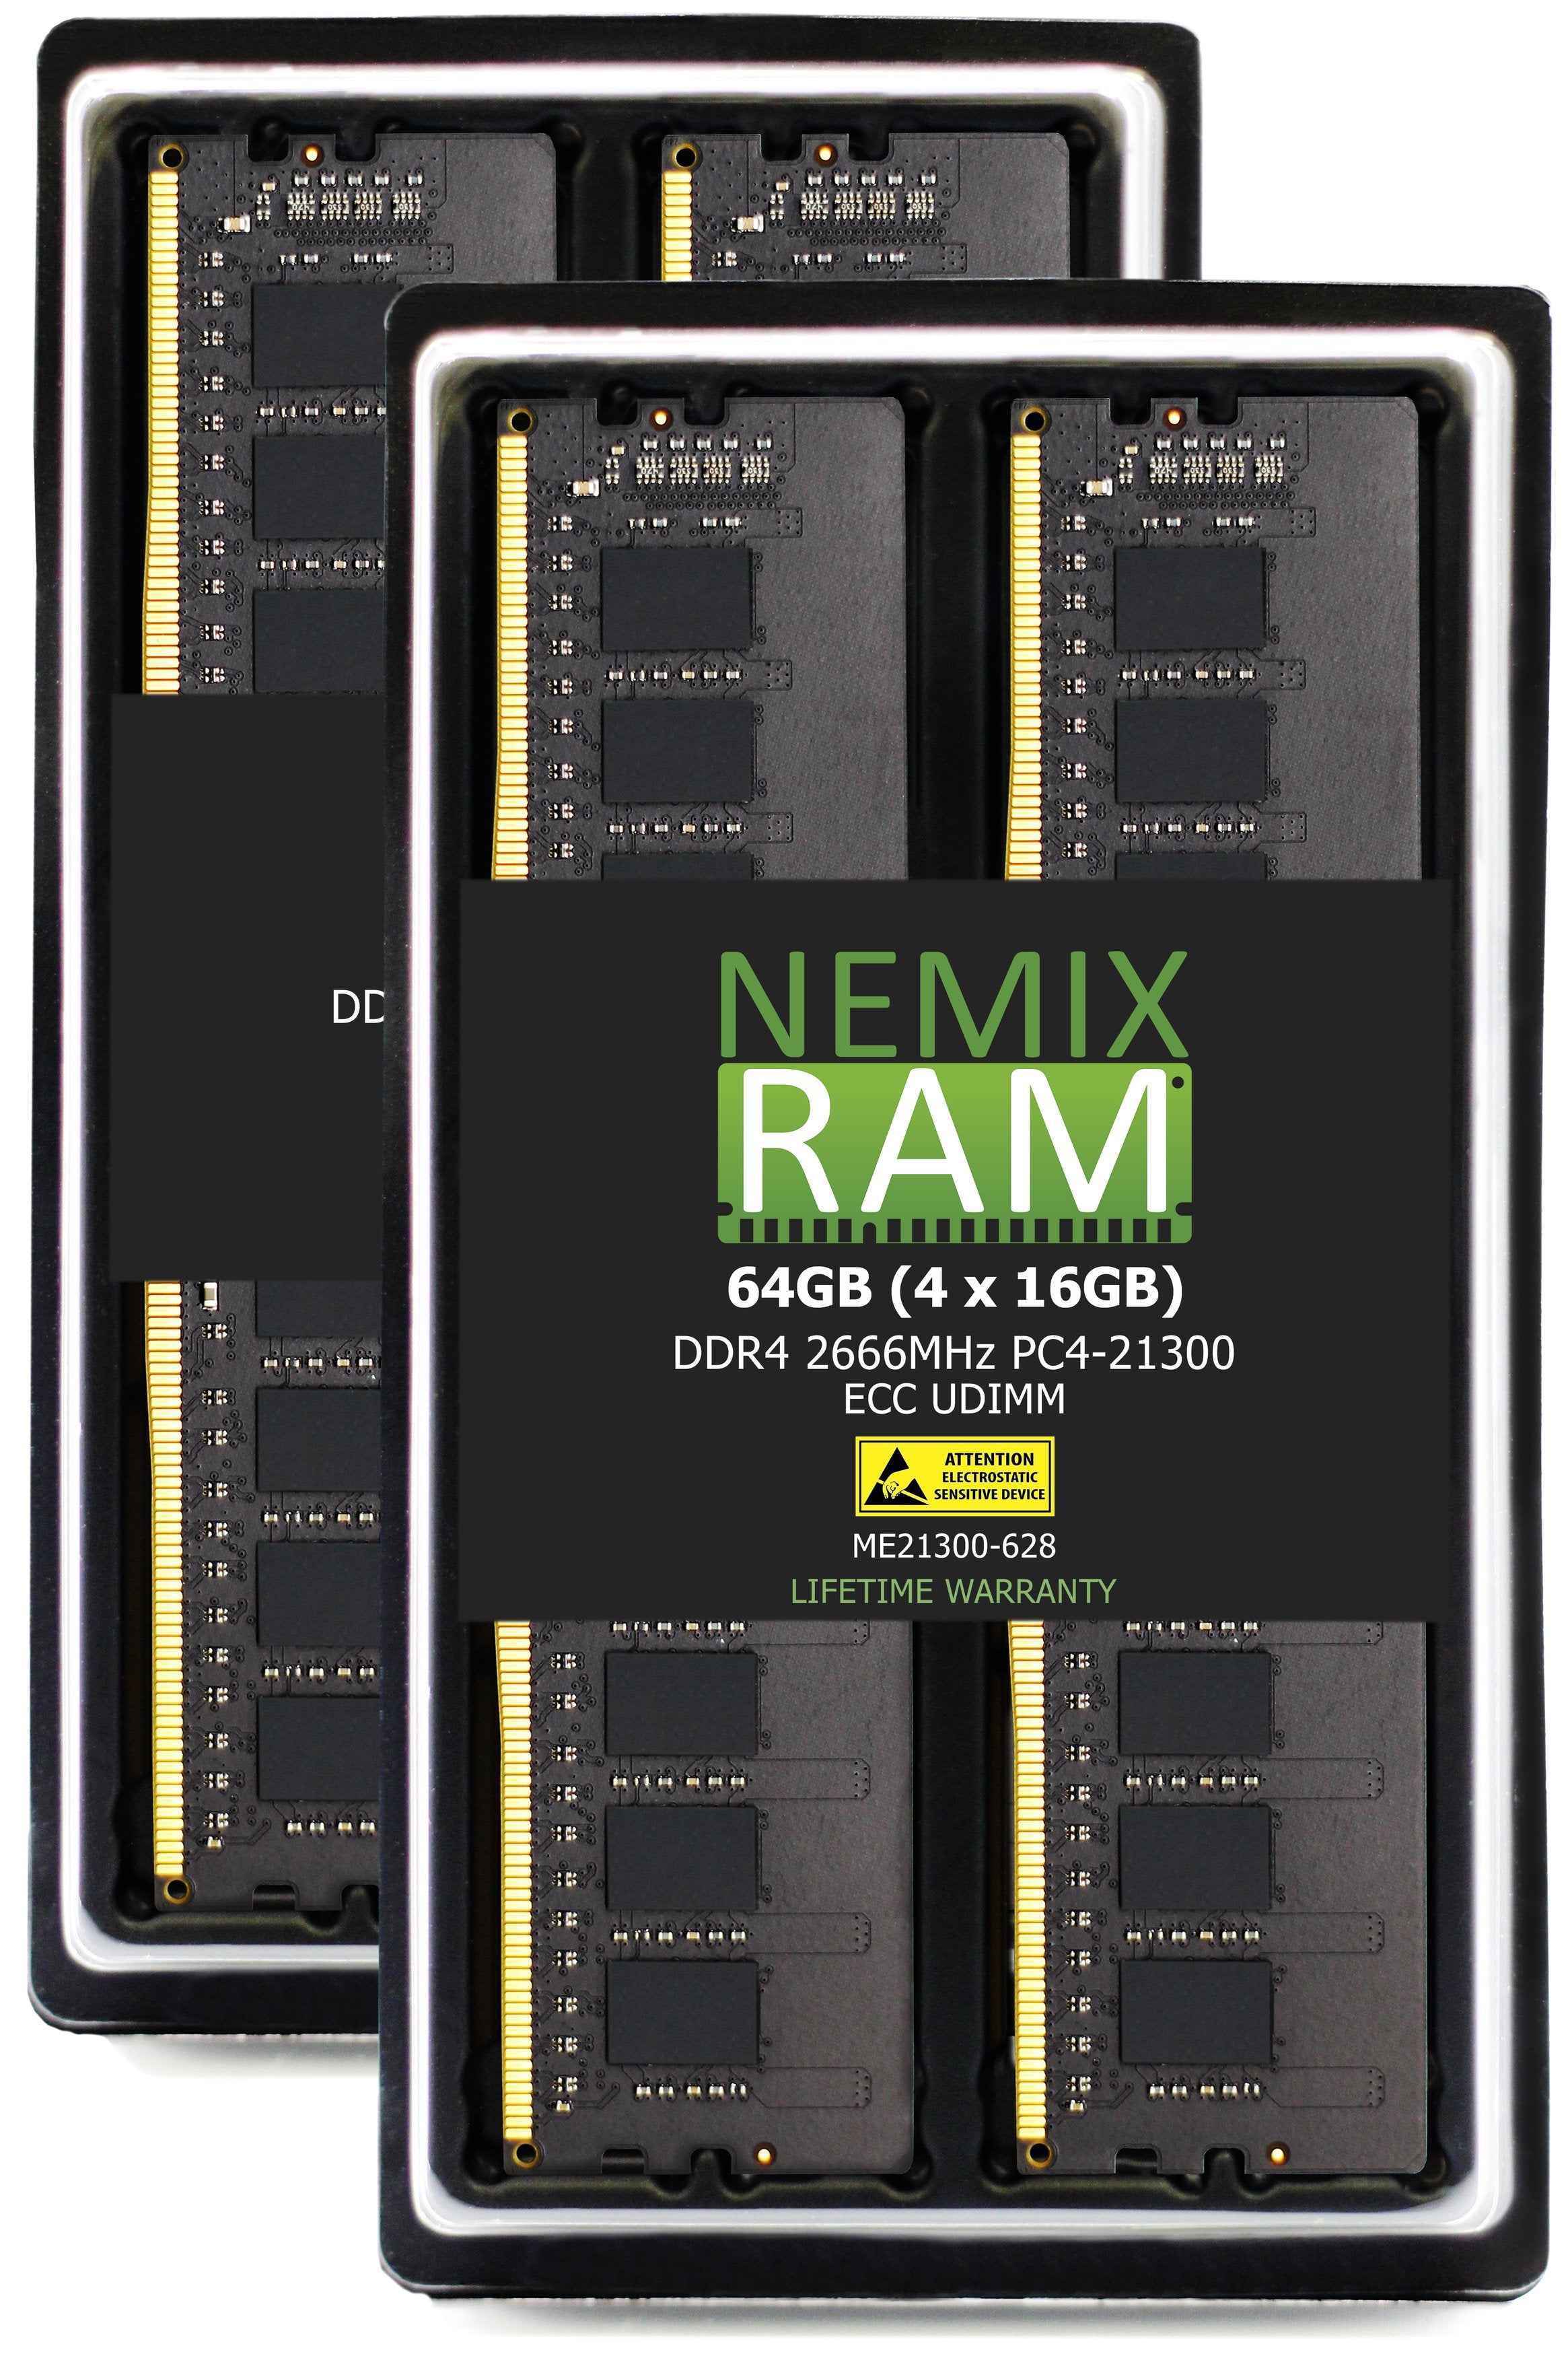 DDR4 2666MHZ PC4-21300 ECC UDIMM Compatible with Synology RackStation RS3621xs+